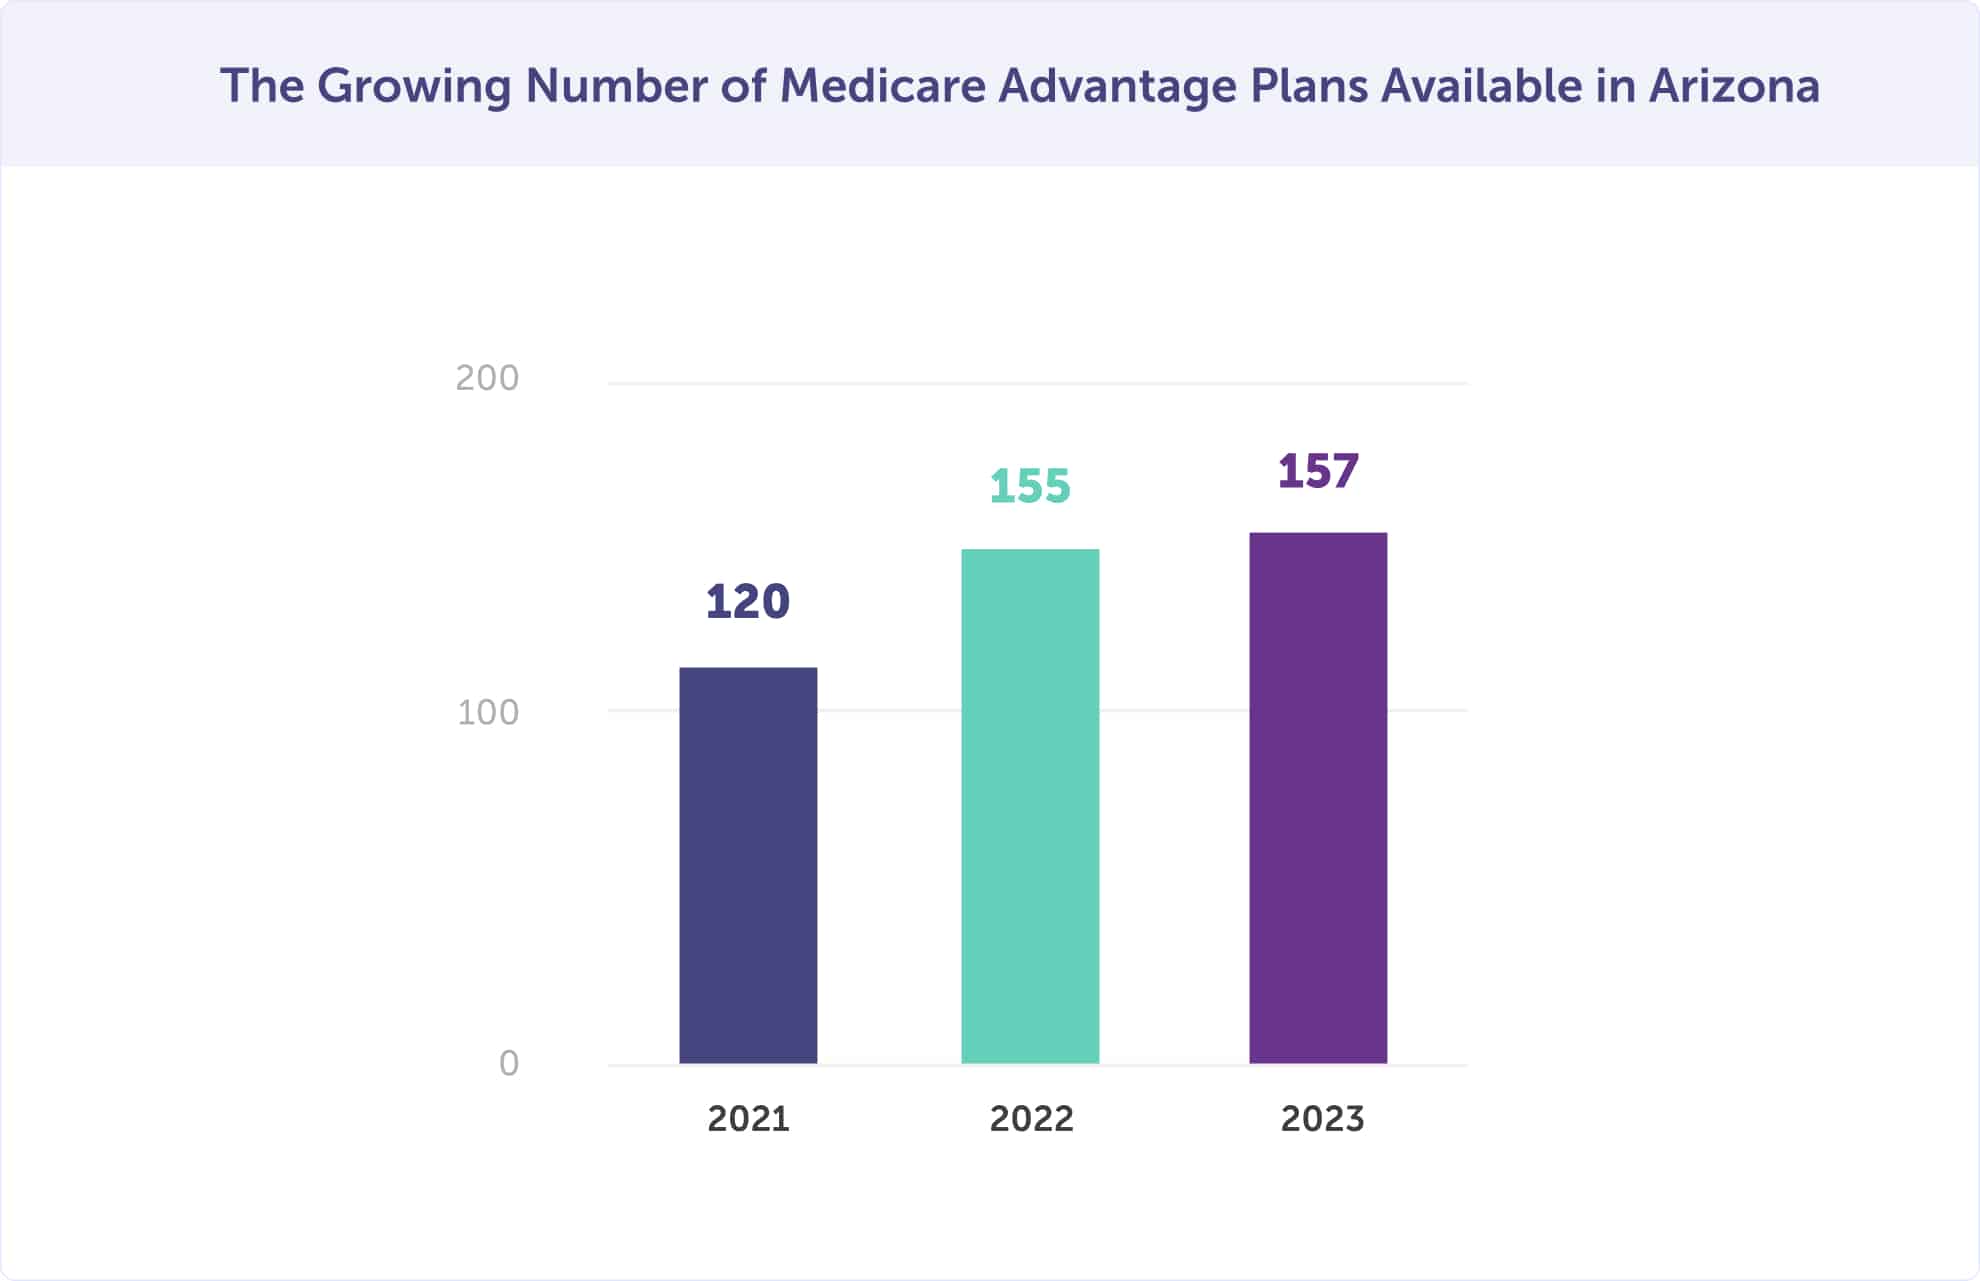 Growing number of Medicare Advantage plans in Arizona